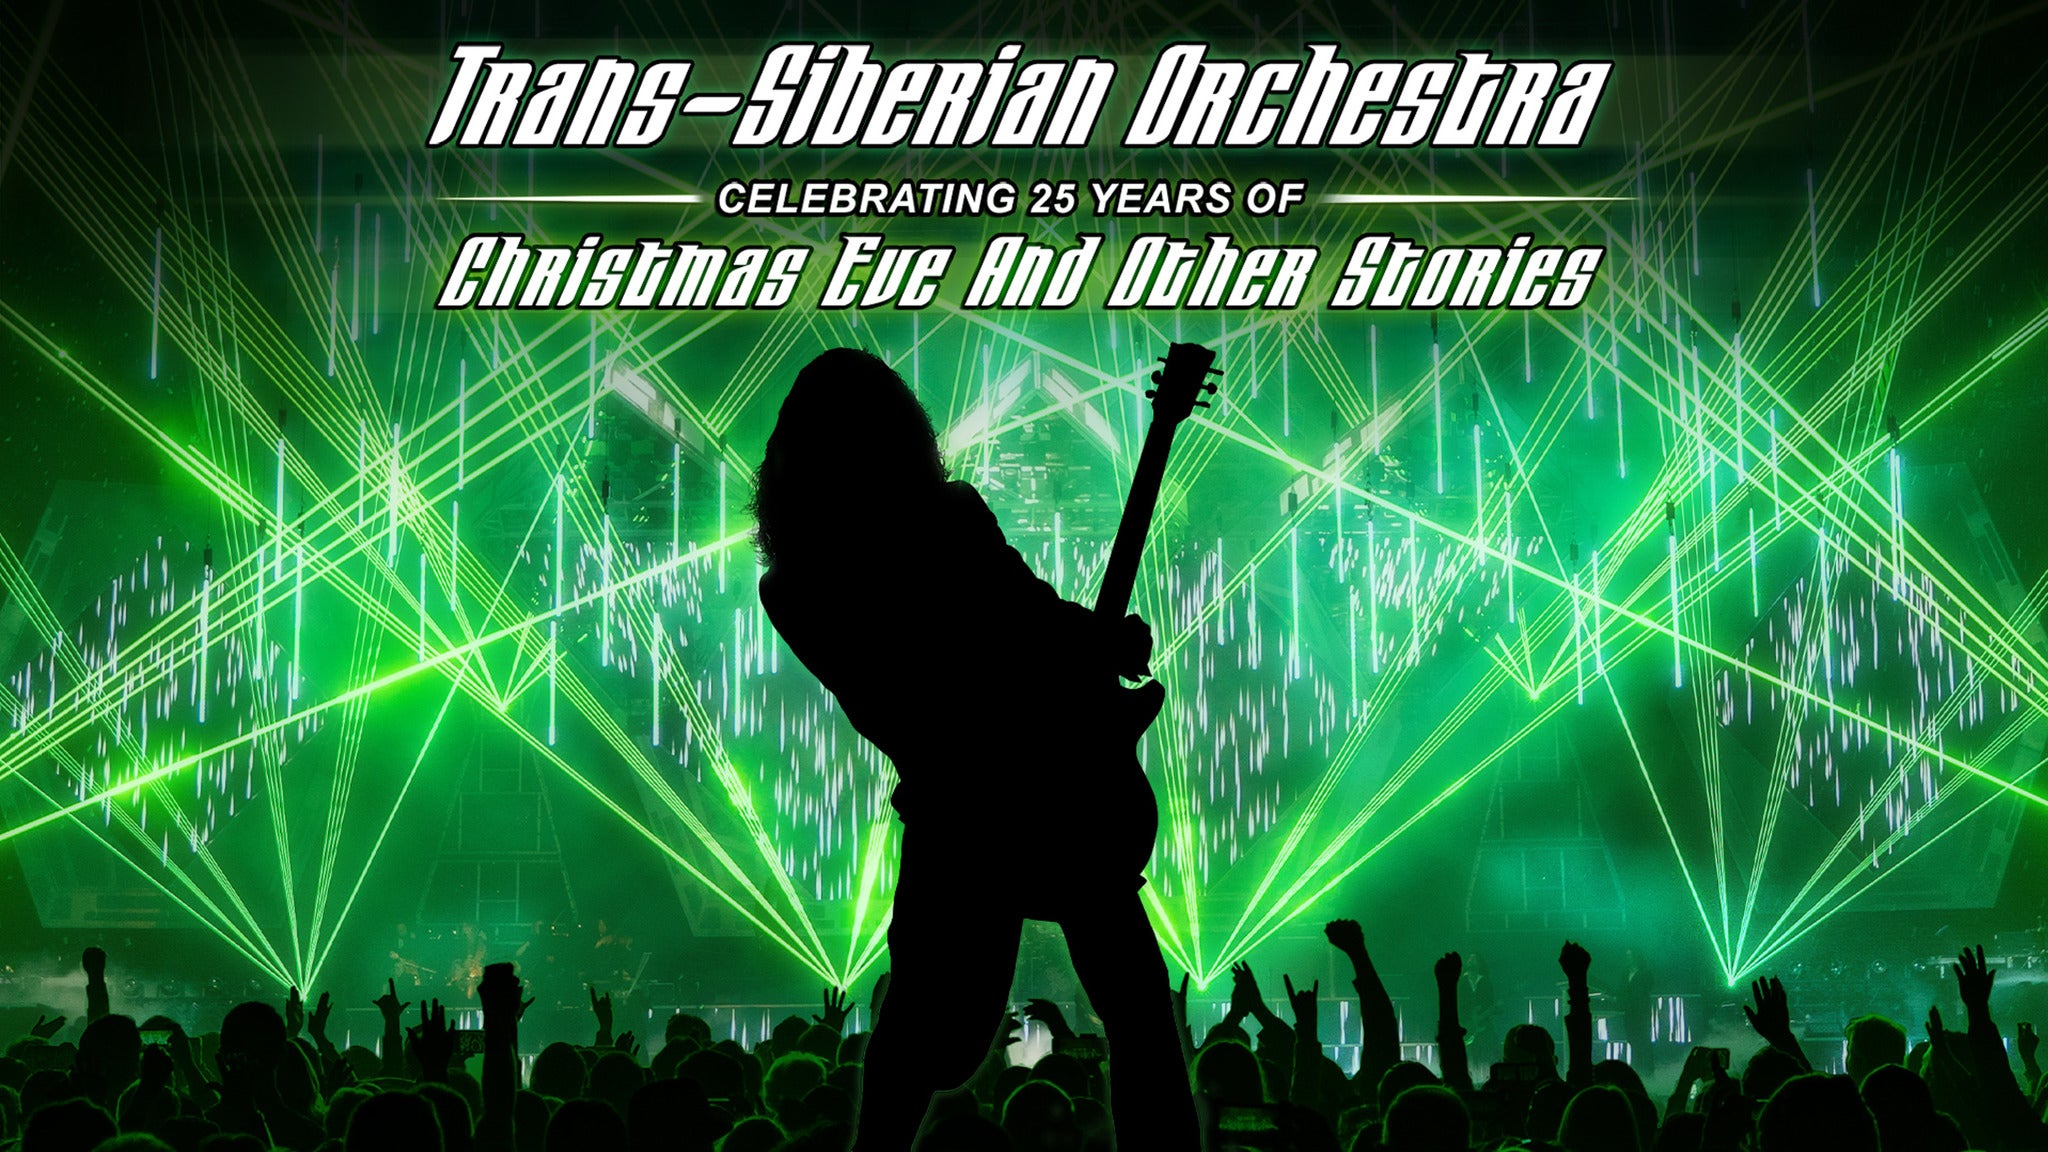 TransSiberian OrchestraChristmas Eve & Other Stories 2021 Presale